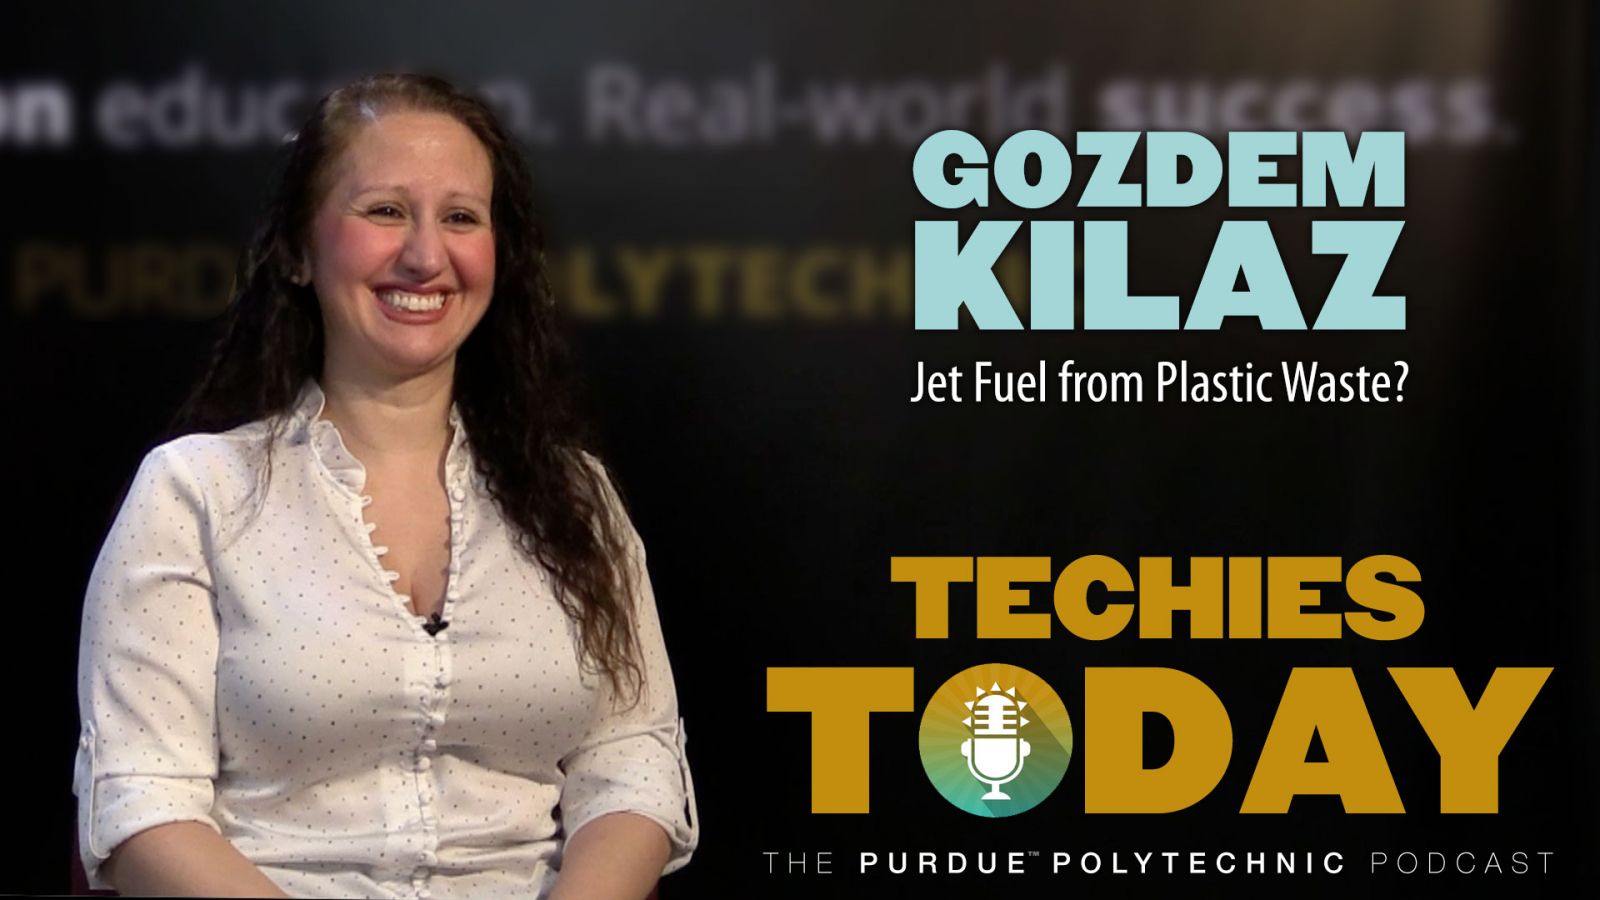 Gozdem Kilaz — Jet Fuel from Plastic Waste? on Techies Today, the Purdue Polytechnic Podcast